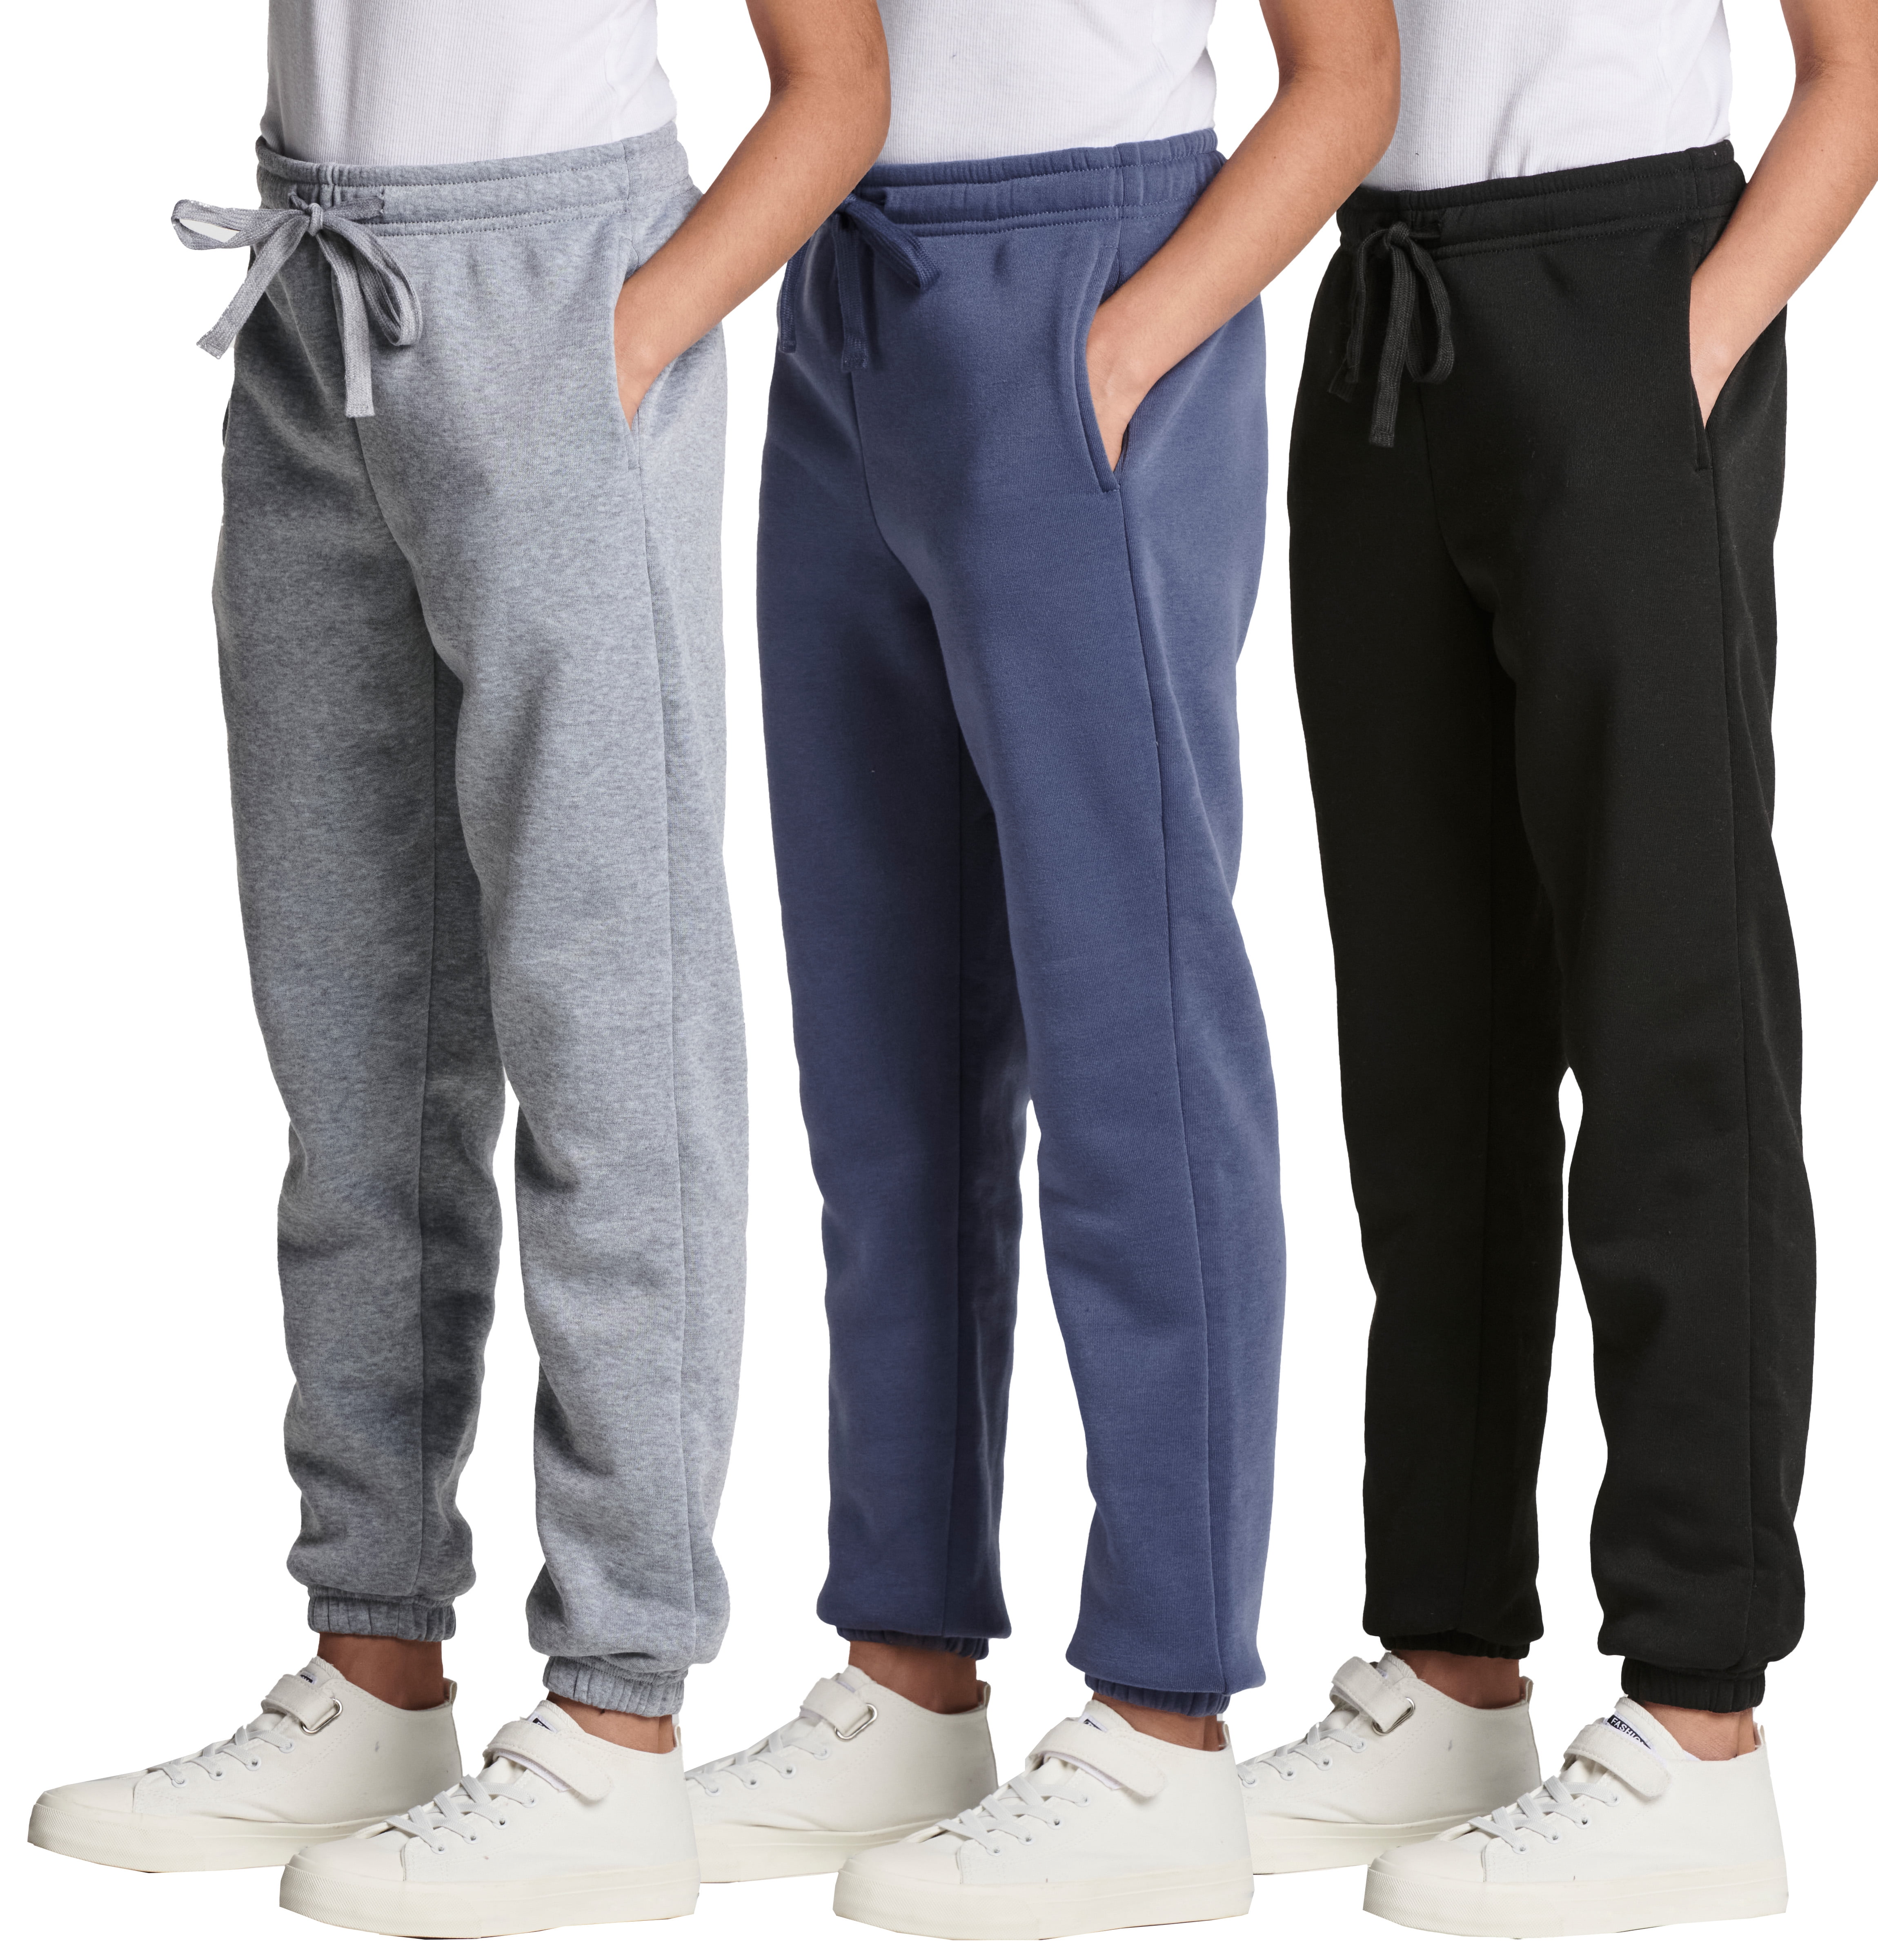 3 Pack: Girls' Fleece Joggers Soft Active Performance Casual Sweatpants ...